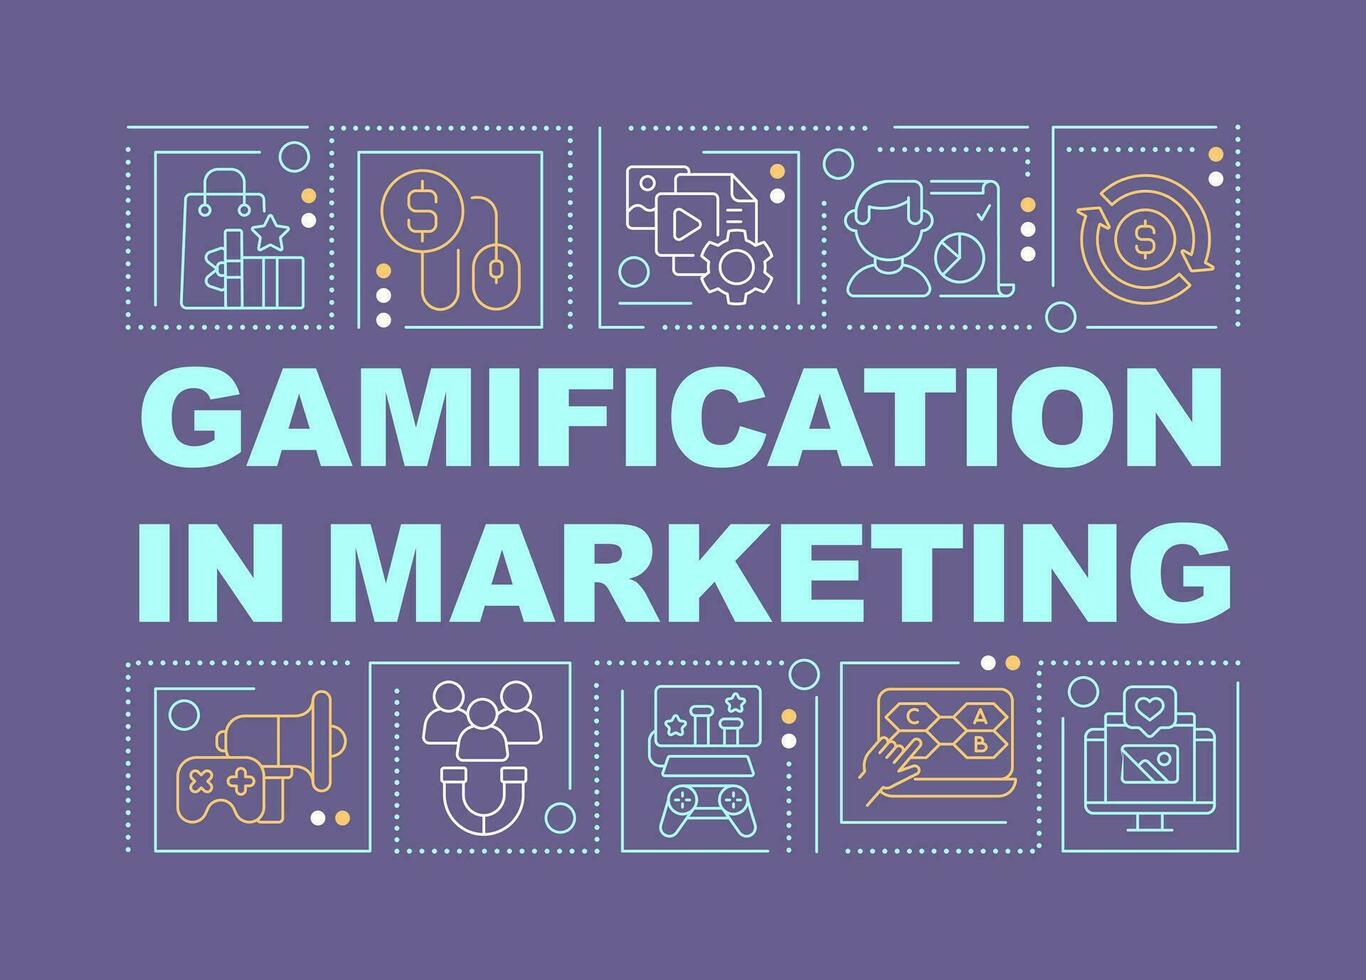 Gamification in marketing word concepts purple banner. Infographics with editable icons on color background. Isolated typography. Vector illustration with text